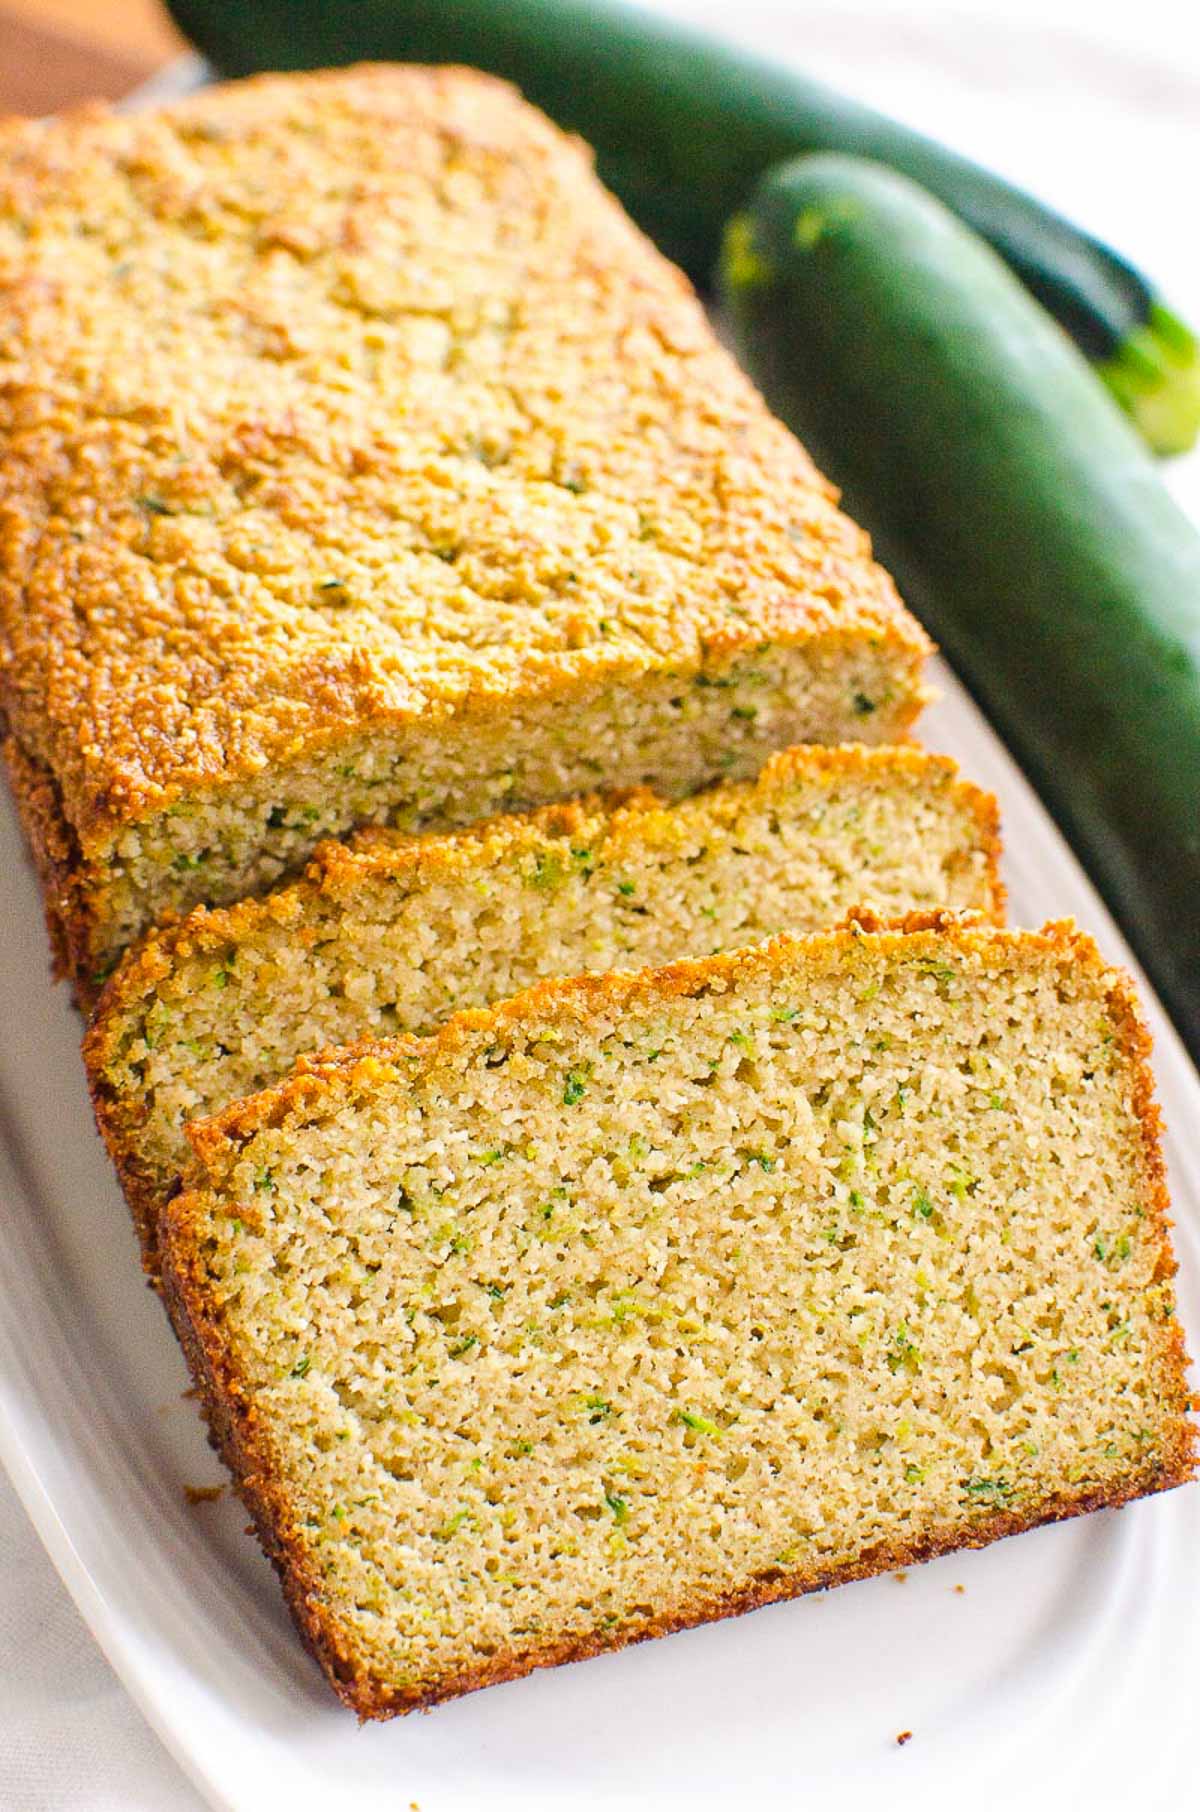 Sliced almond flour zucchini bread on a platter. More zucchini on a counter.